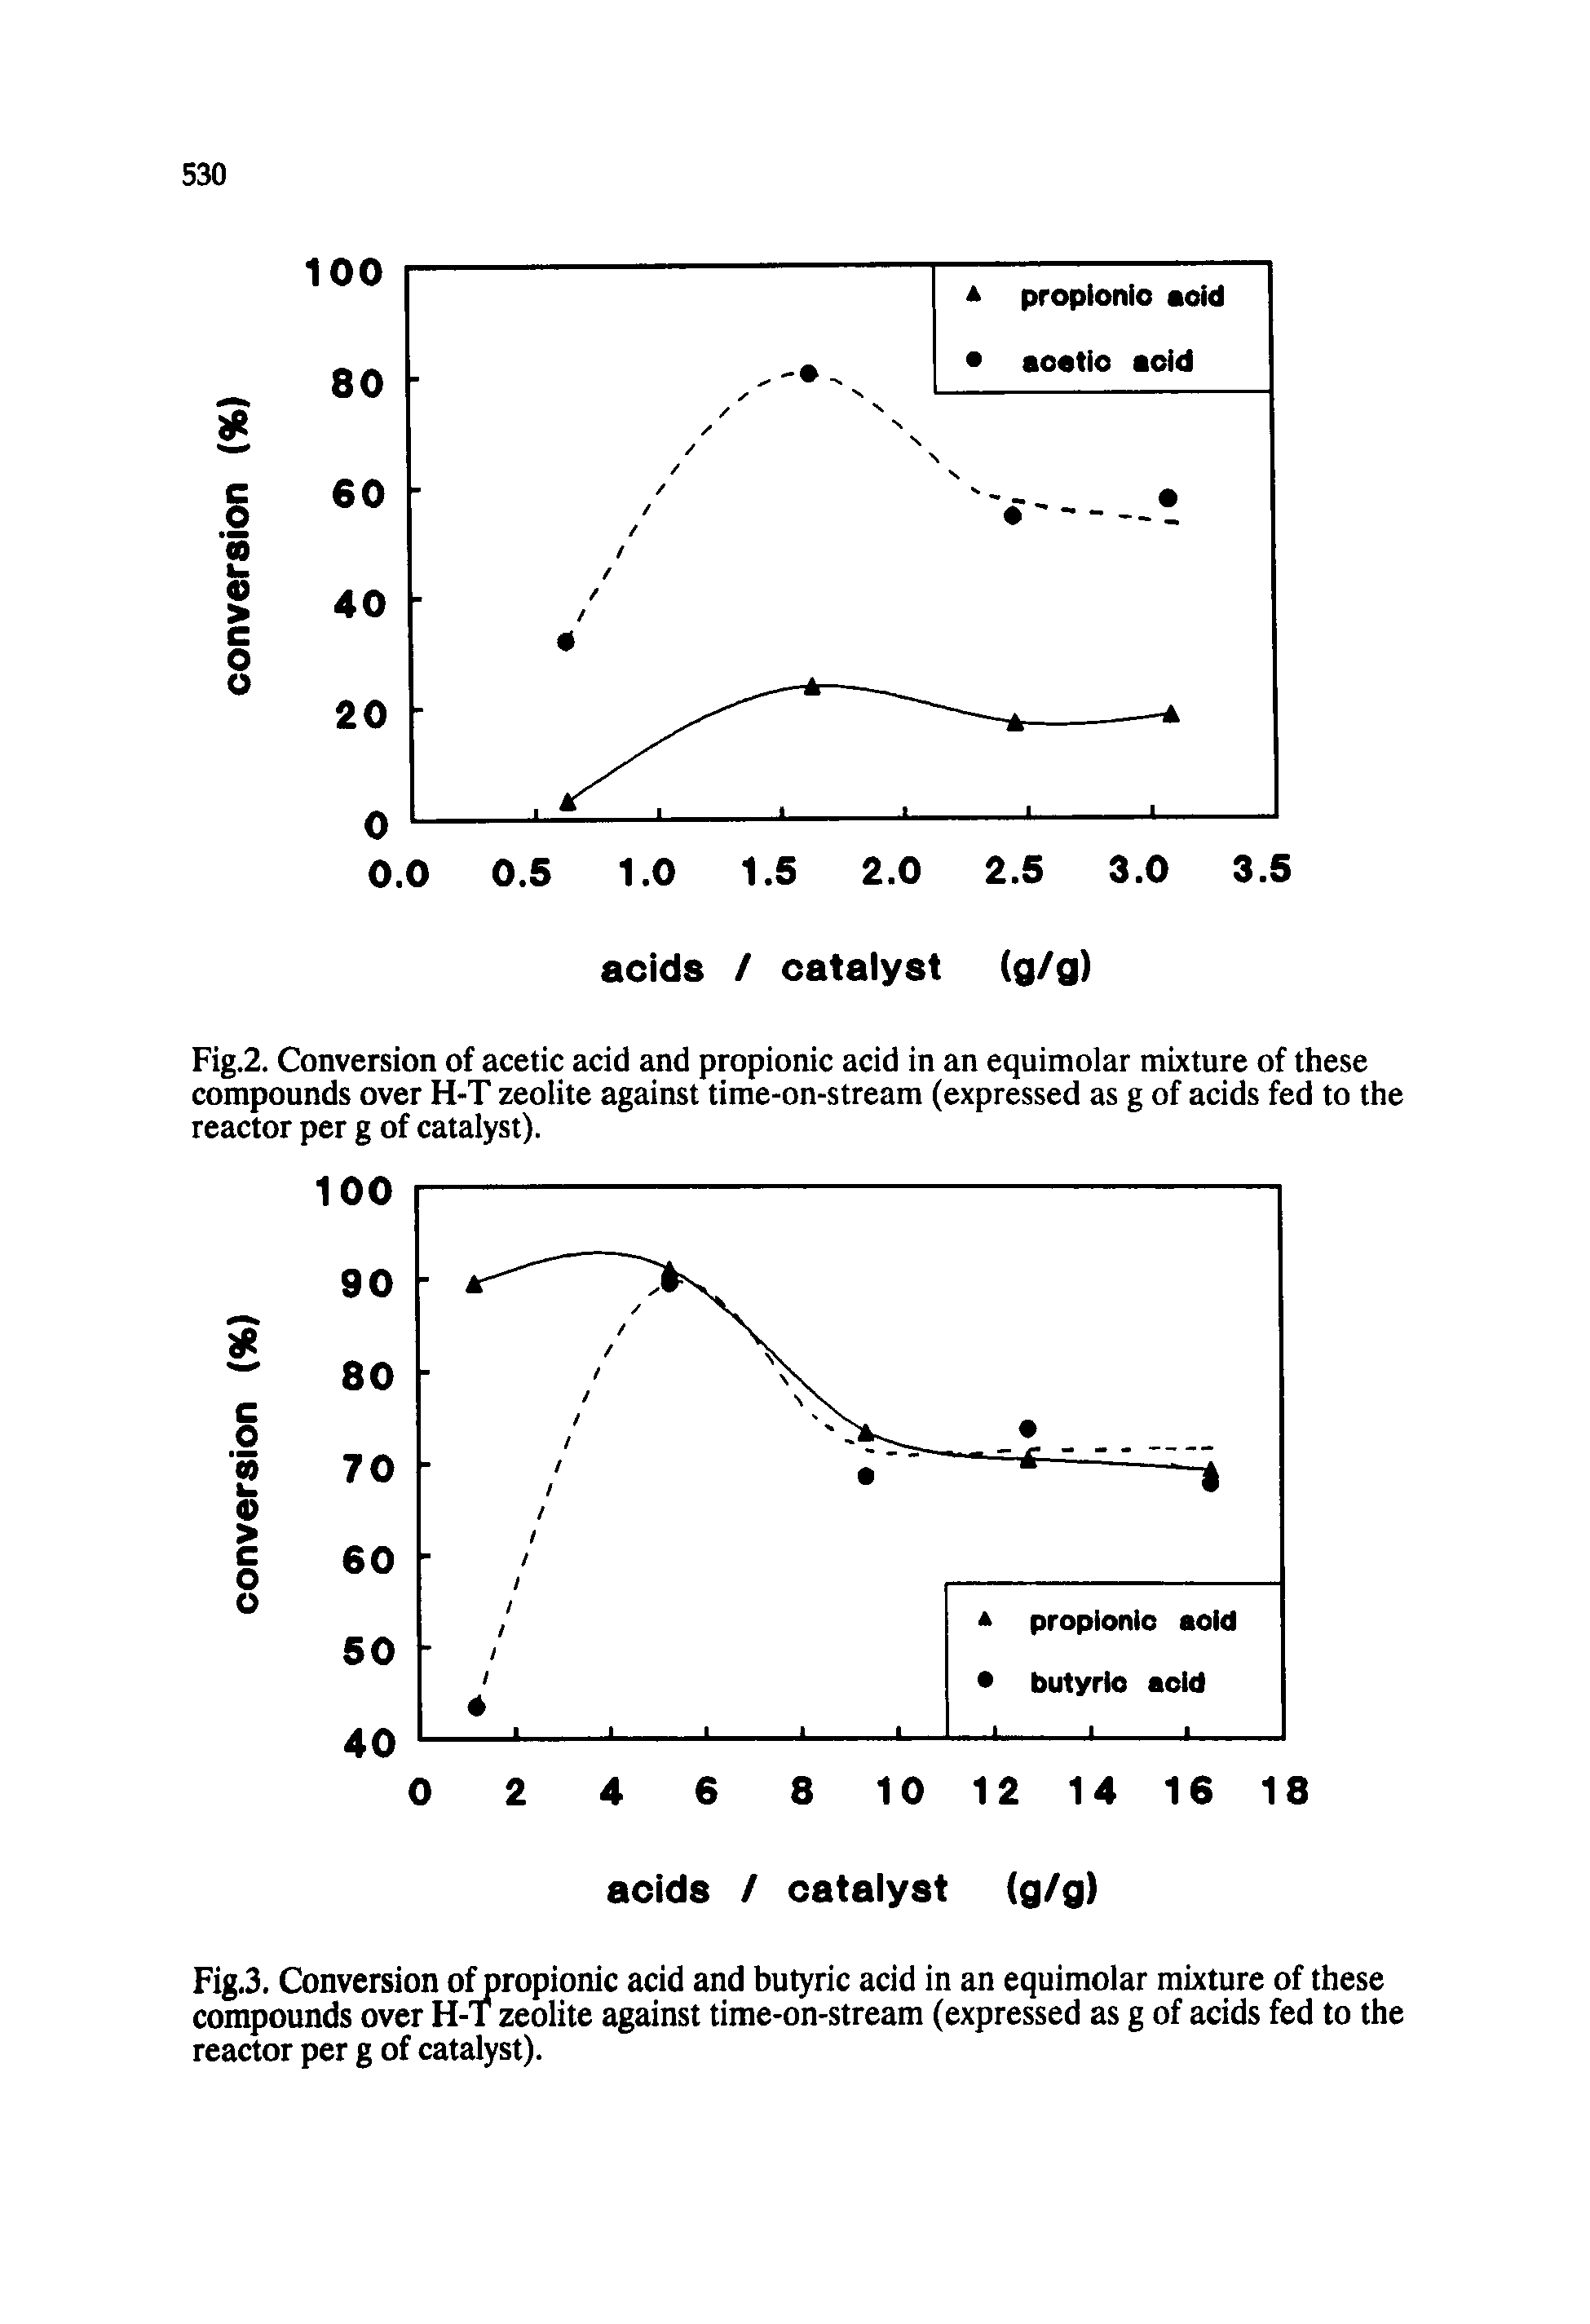 Fig.3. Conversion o ropionic acid and butyric acid in an equimolar mixture of these compounds over H-T zeolite against time-on-stream (expressed as g of acids fed to the reactor per g of catalyst).